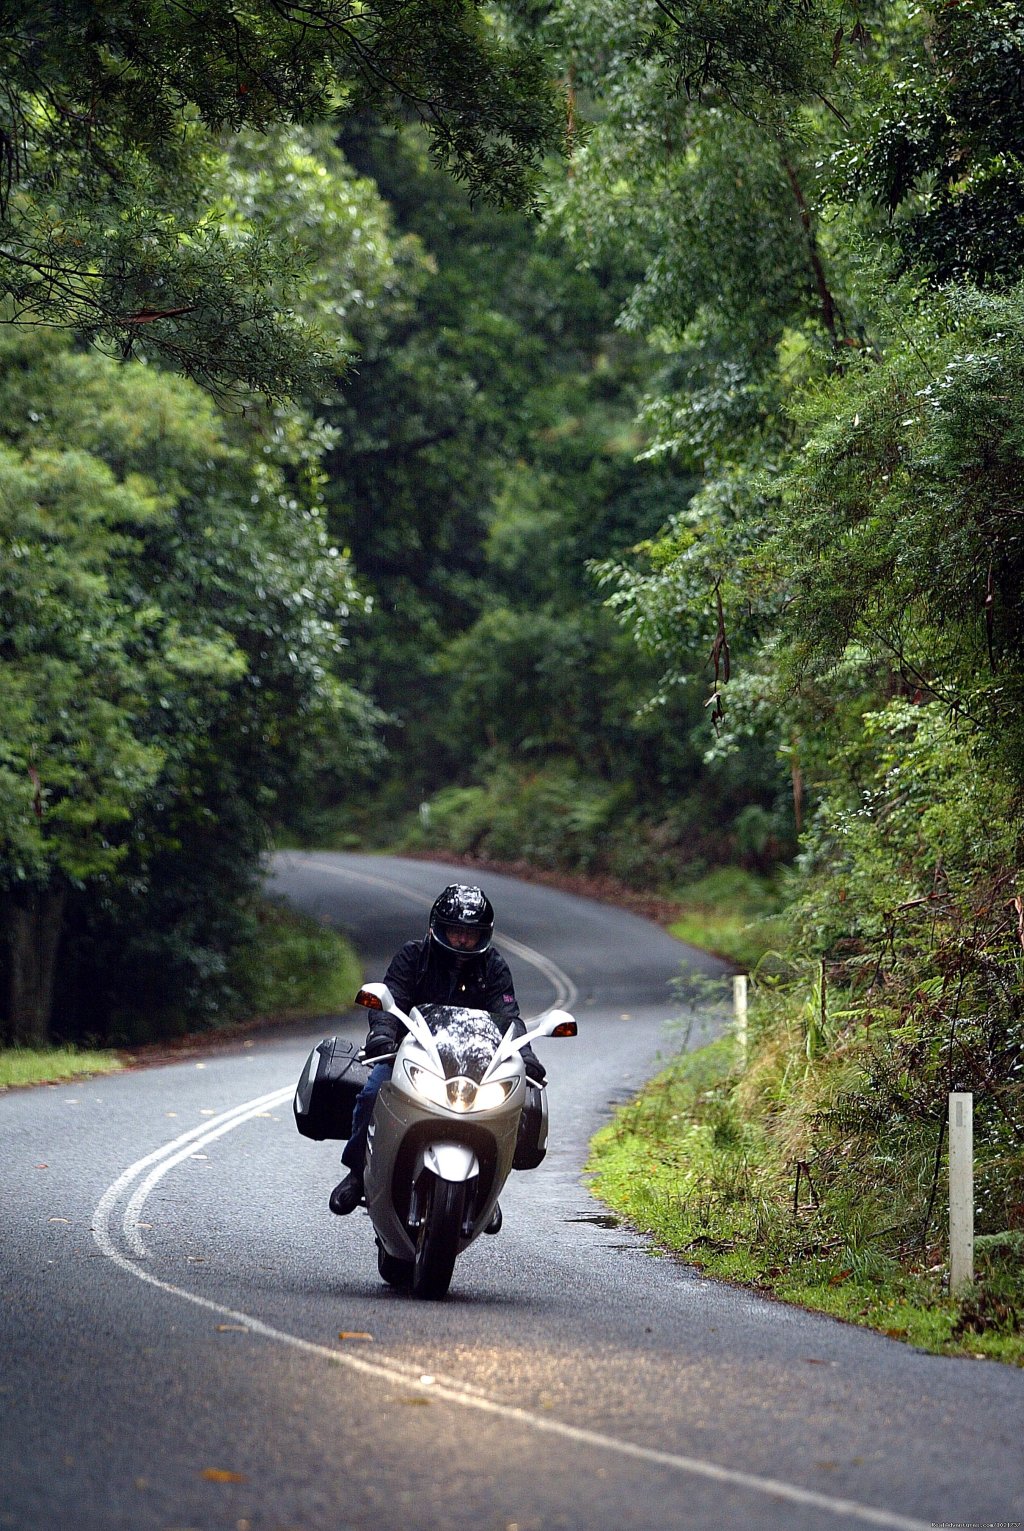 Bikescape Motorcycle Tours & Rentals | Annandale, Australia | Motorcycle Tours | Image #1/14 | 